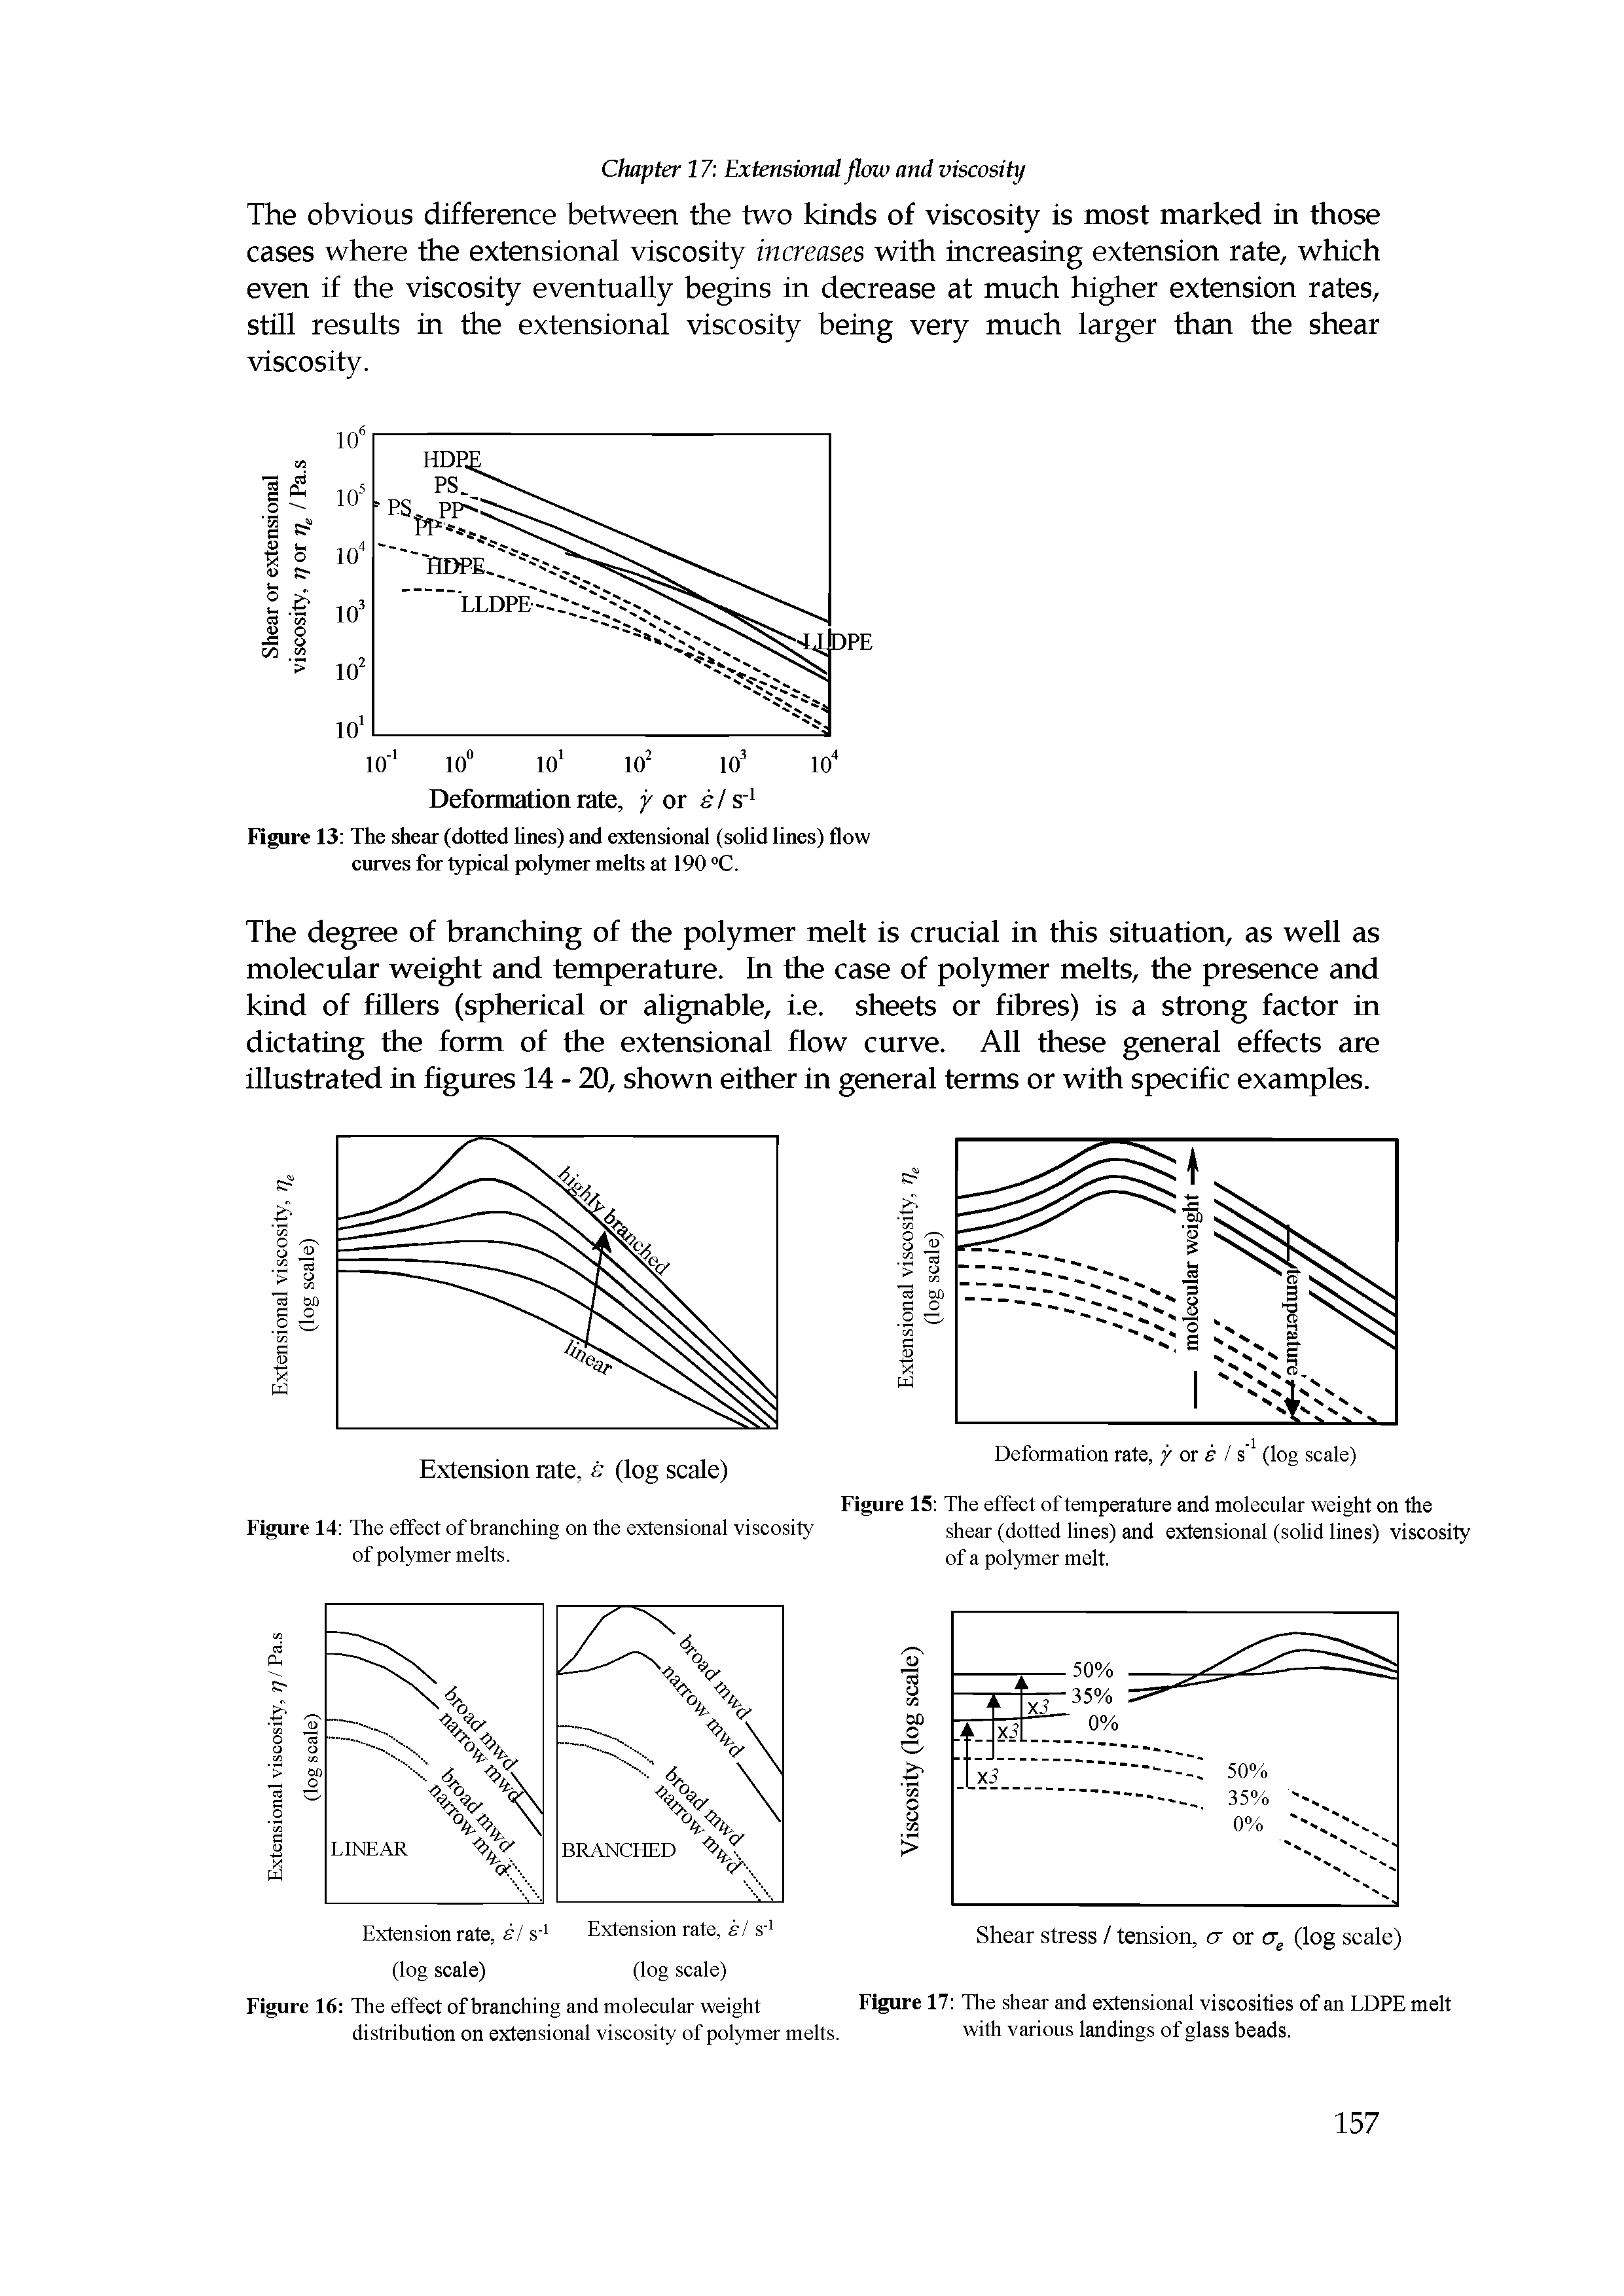 Figure 14 The effect of branching on the extensional viscosity of polymer melts.